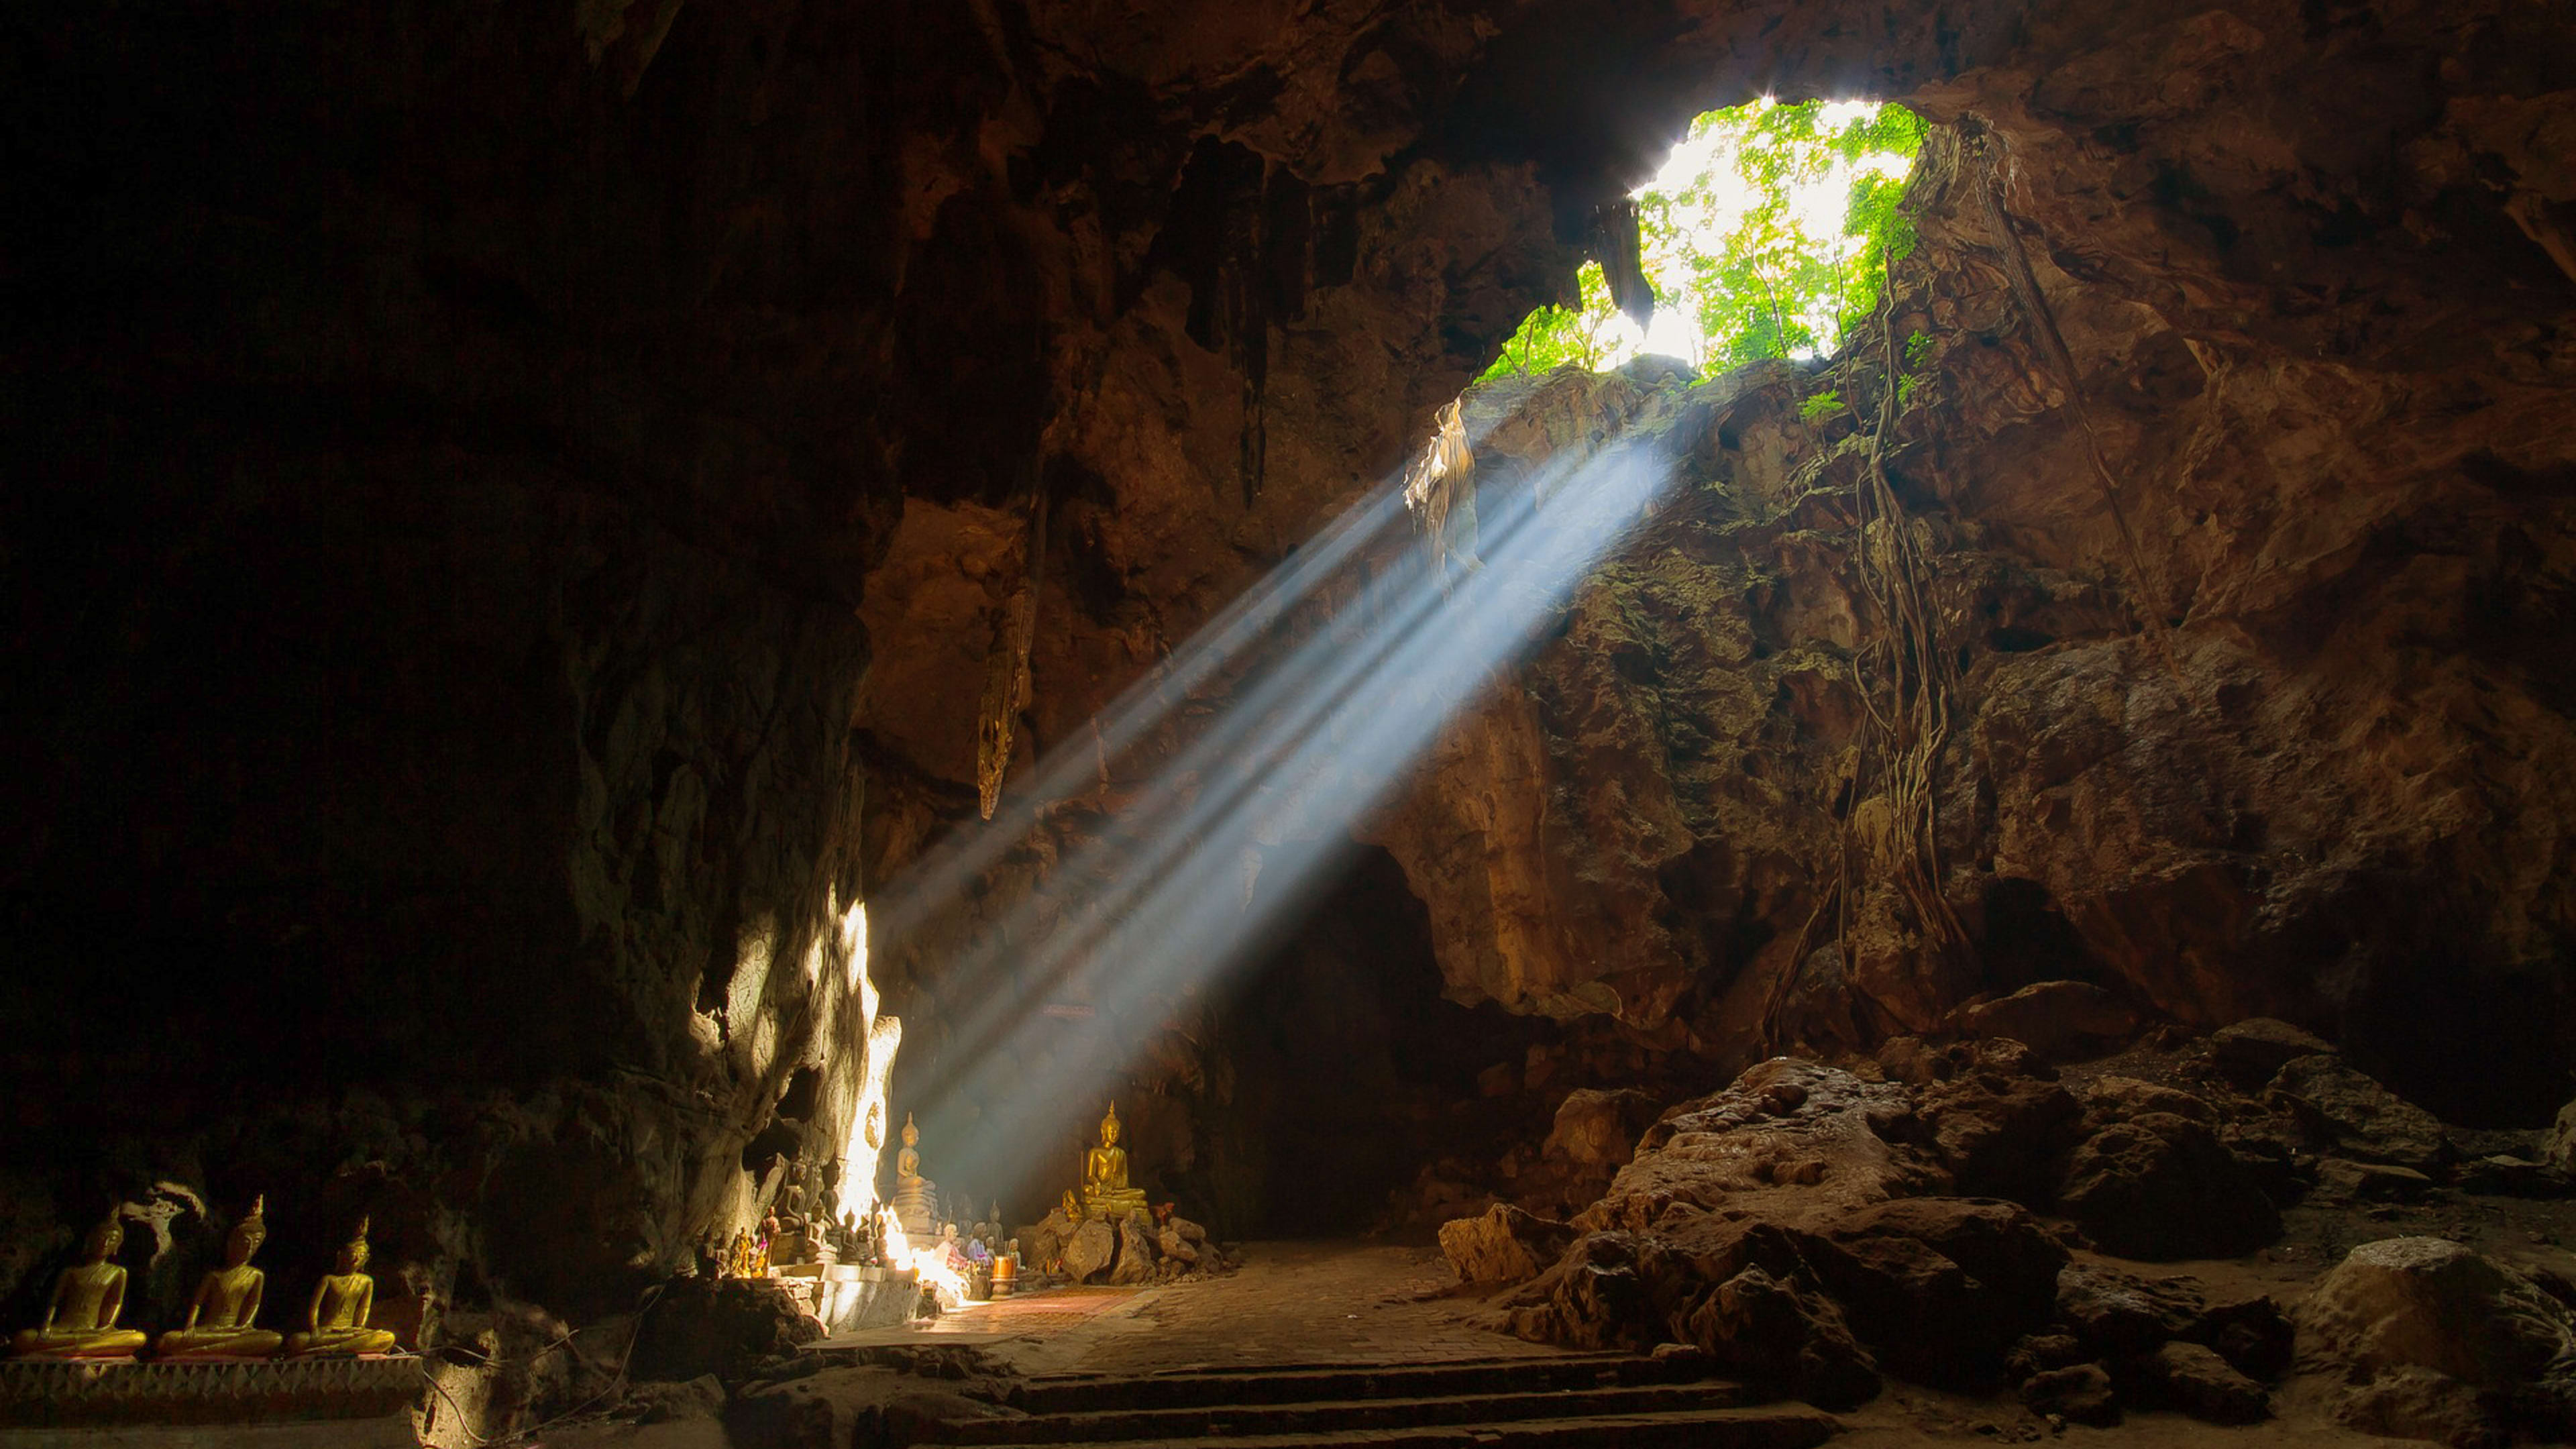 There are already two competing Thai cave rescue movies in the works